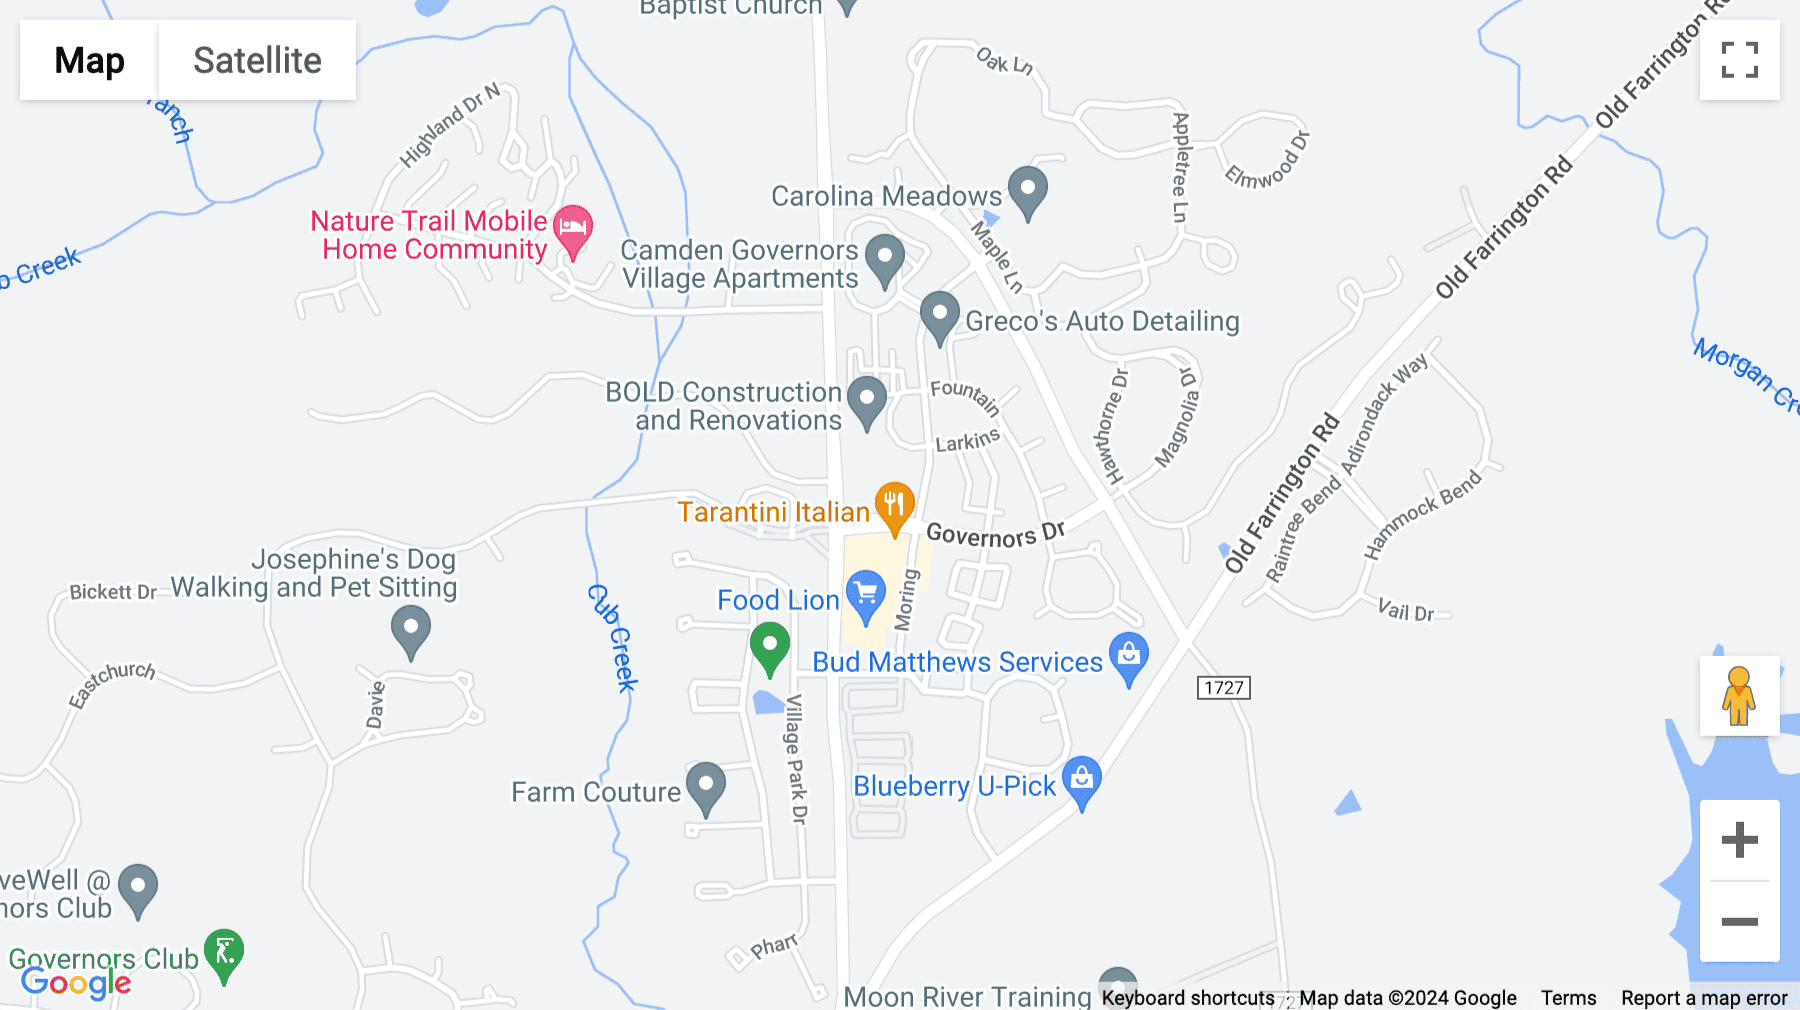 Click for interative map of 50101 Governors Drive, Bold Building, Suite 280, Chapel Hill